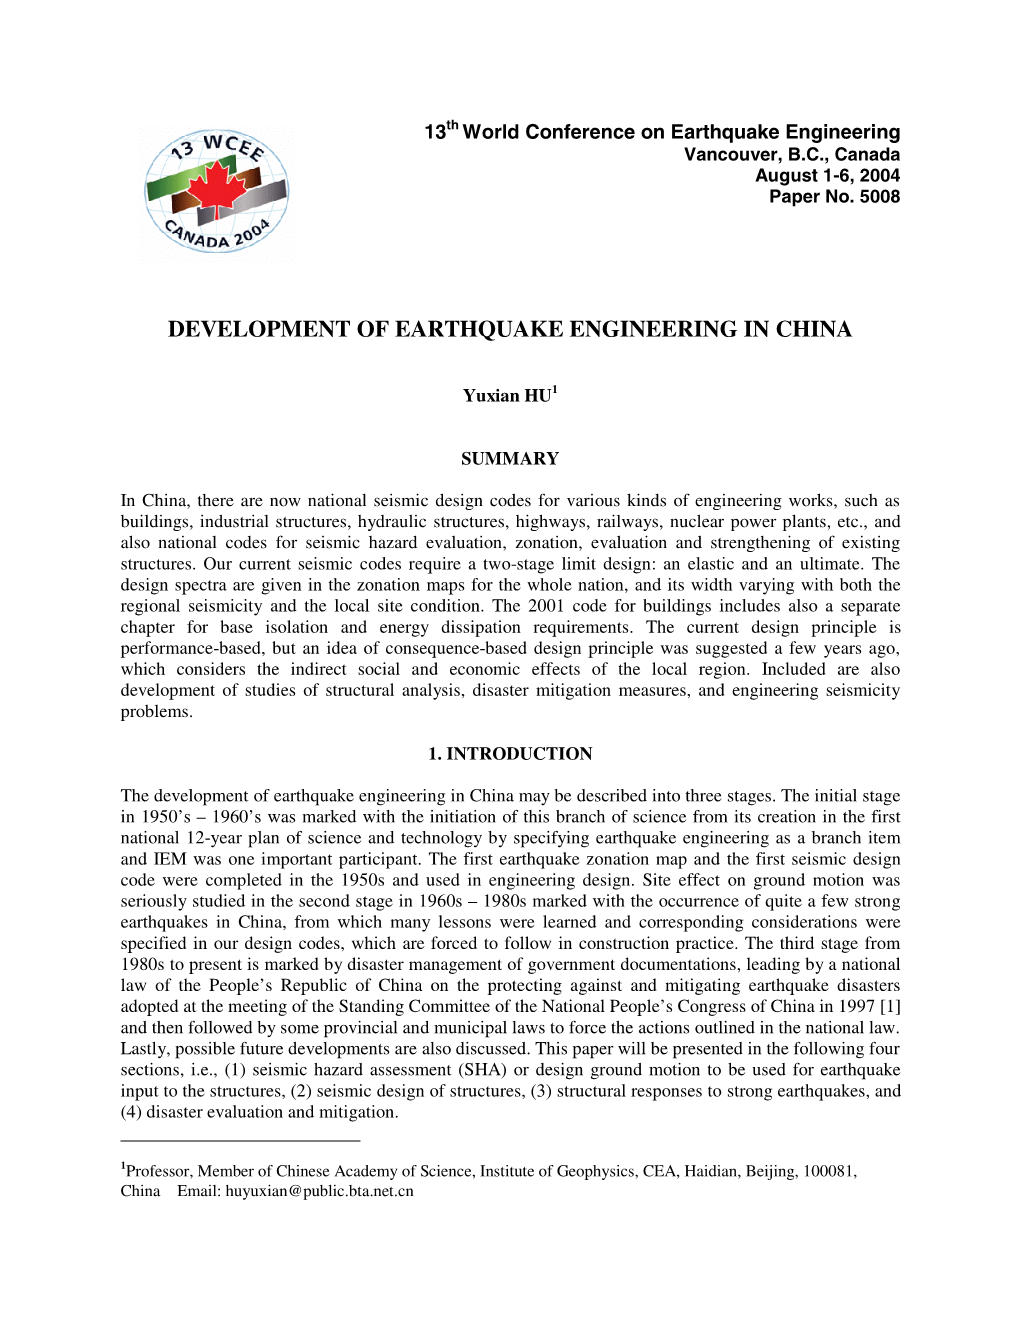 Development of Earthquake Engineering in China